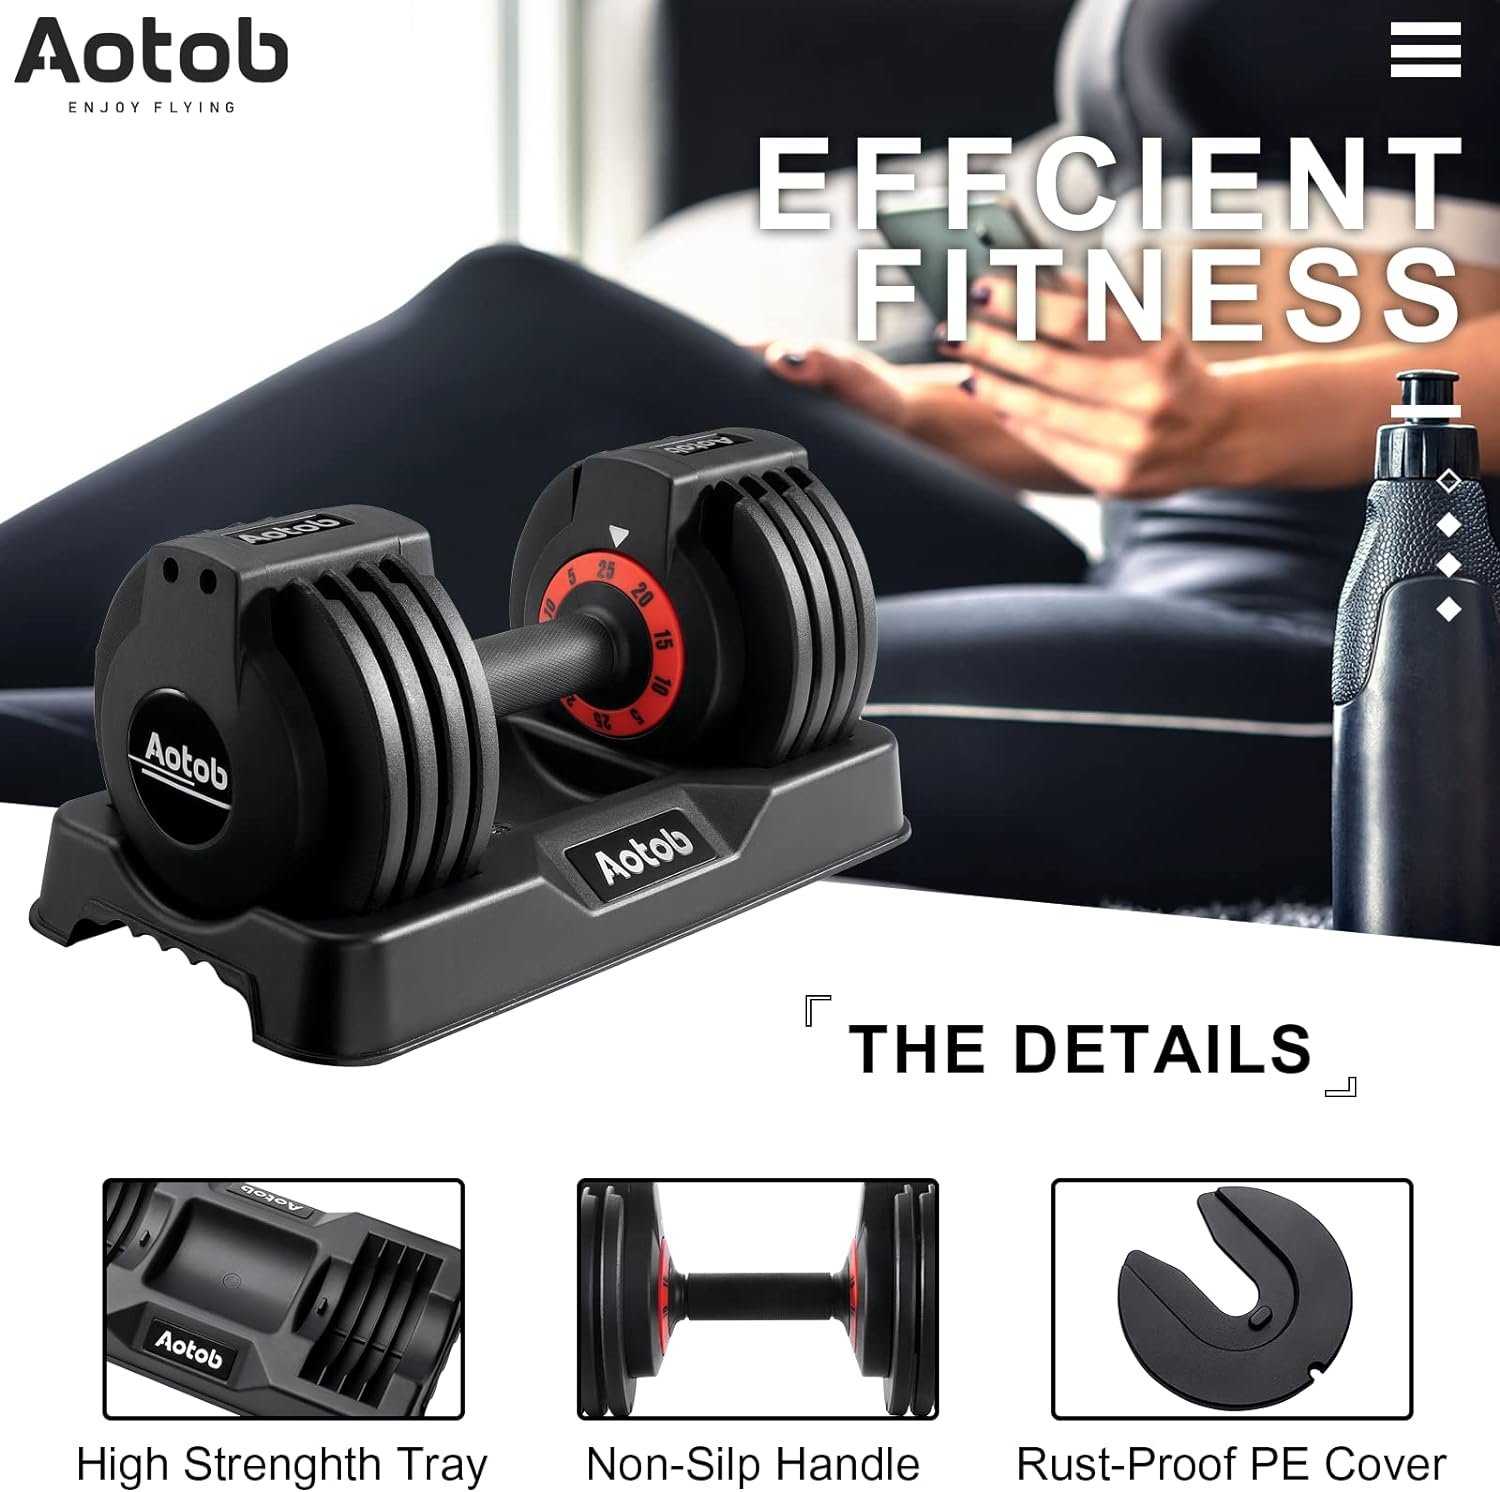 AOTOB 25/55 lbs (Pair) Adjustable Dumbbell Set, Dumbbells Adjustable Weight with Anti-Slip Fast Adjust Turning Handle, Dumbbell Sets Adjustable for Men and Women, Dumbbells Pair for Home Gym Exercise